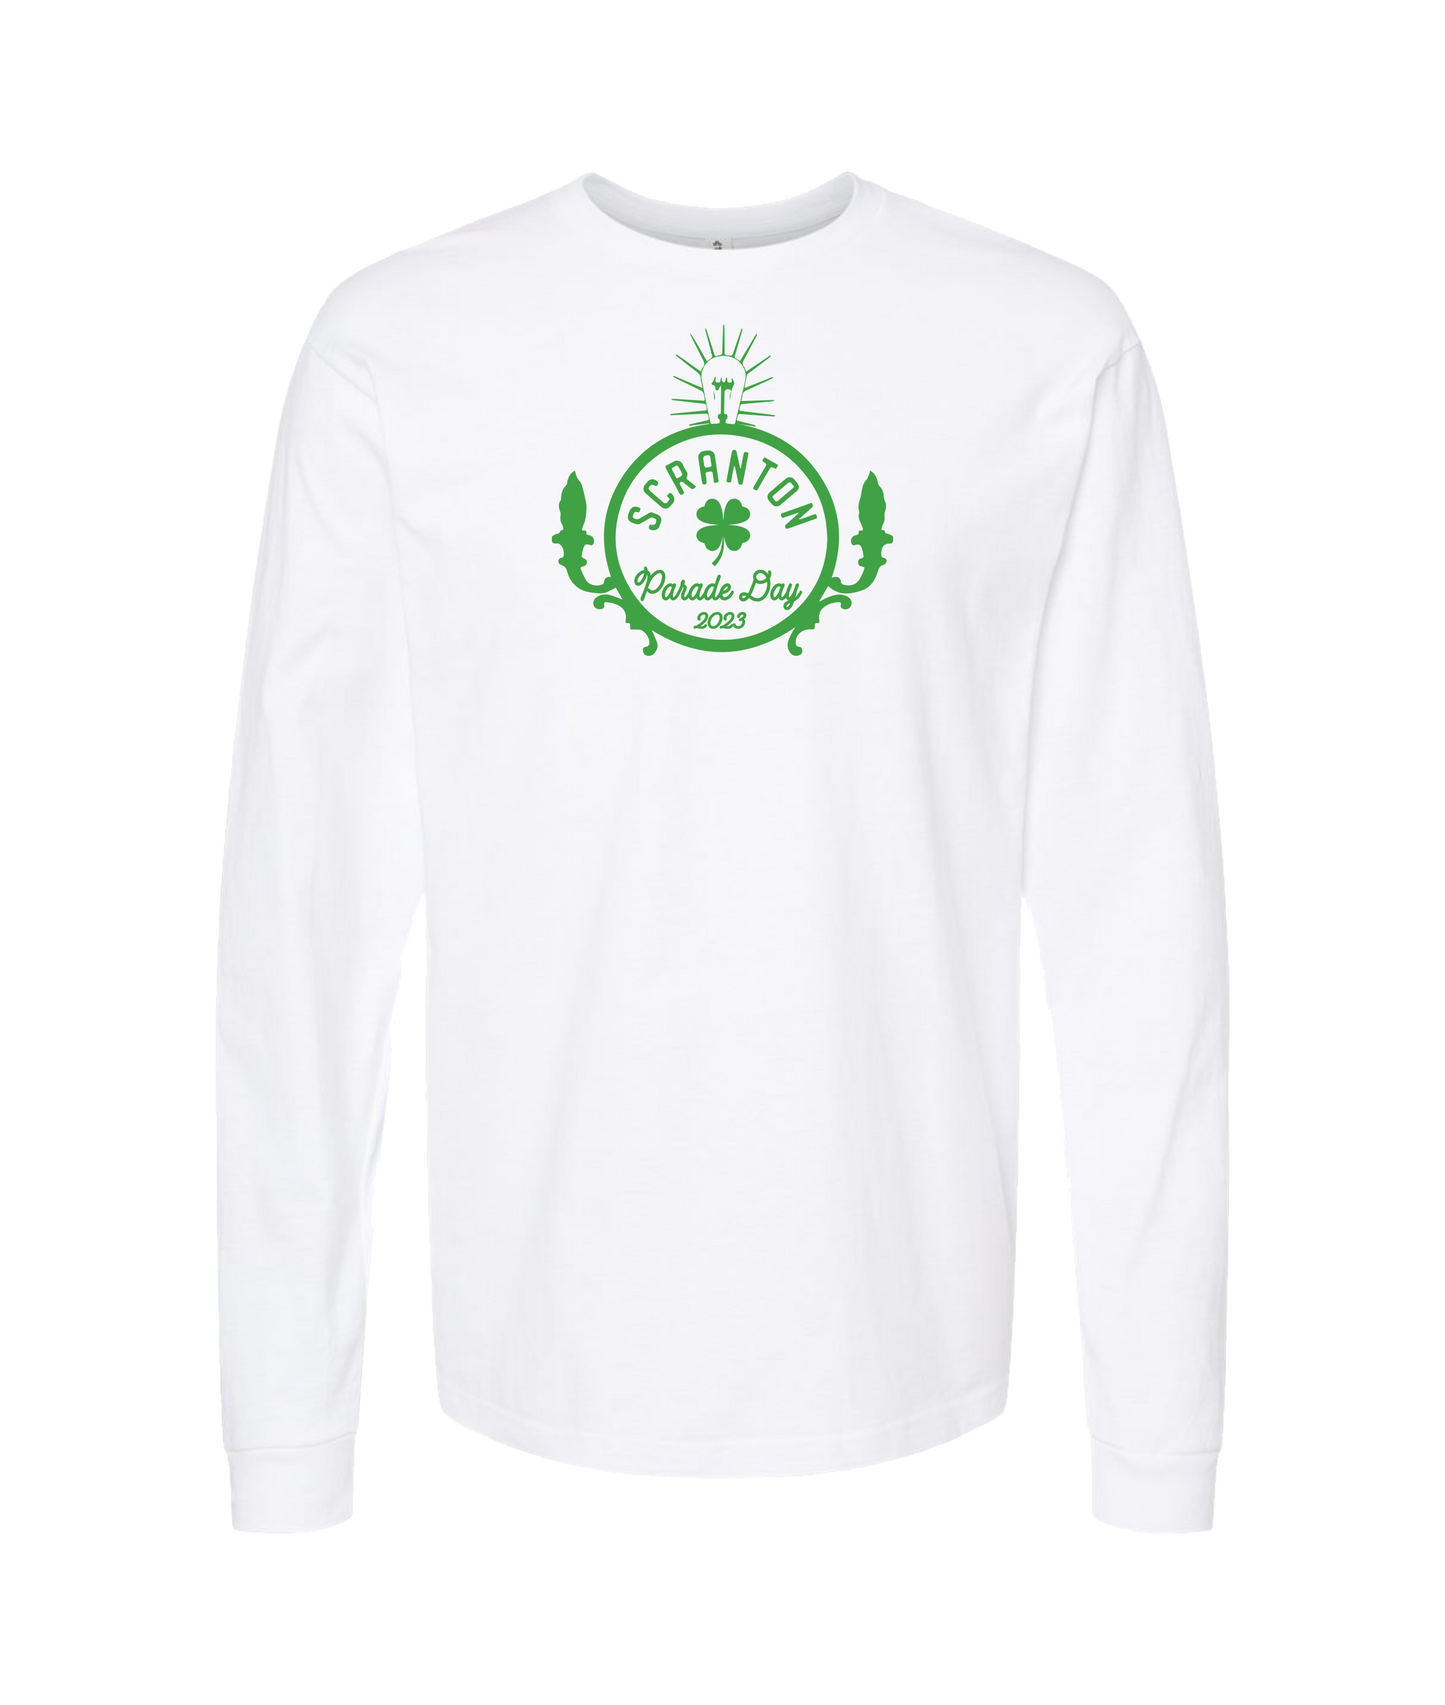 Paul Ludo - Parade Day - White Long Sleeve T